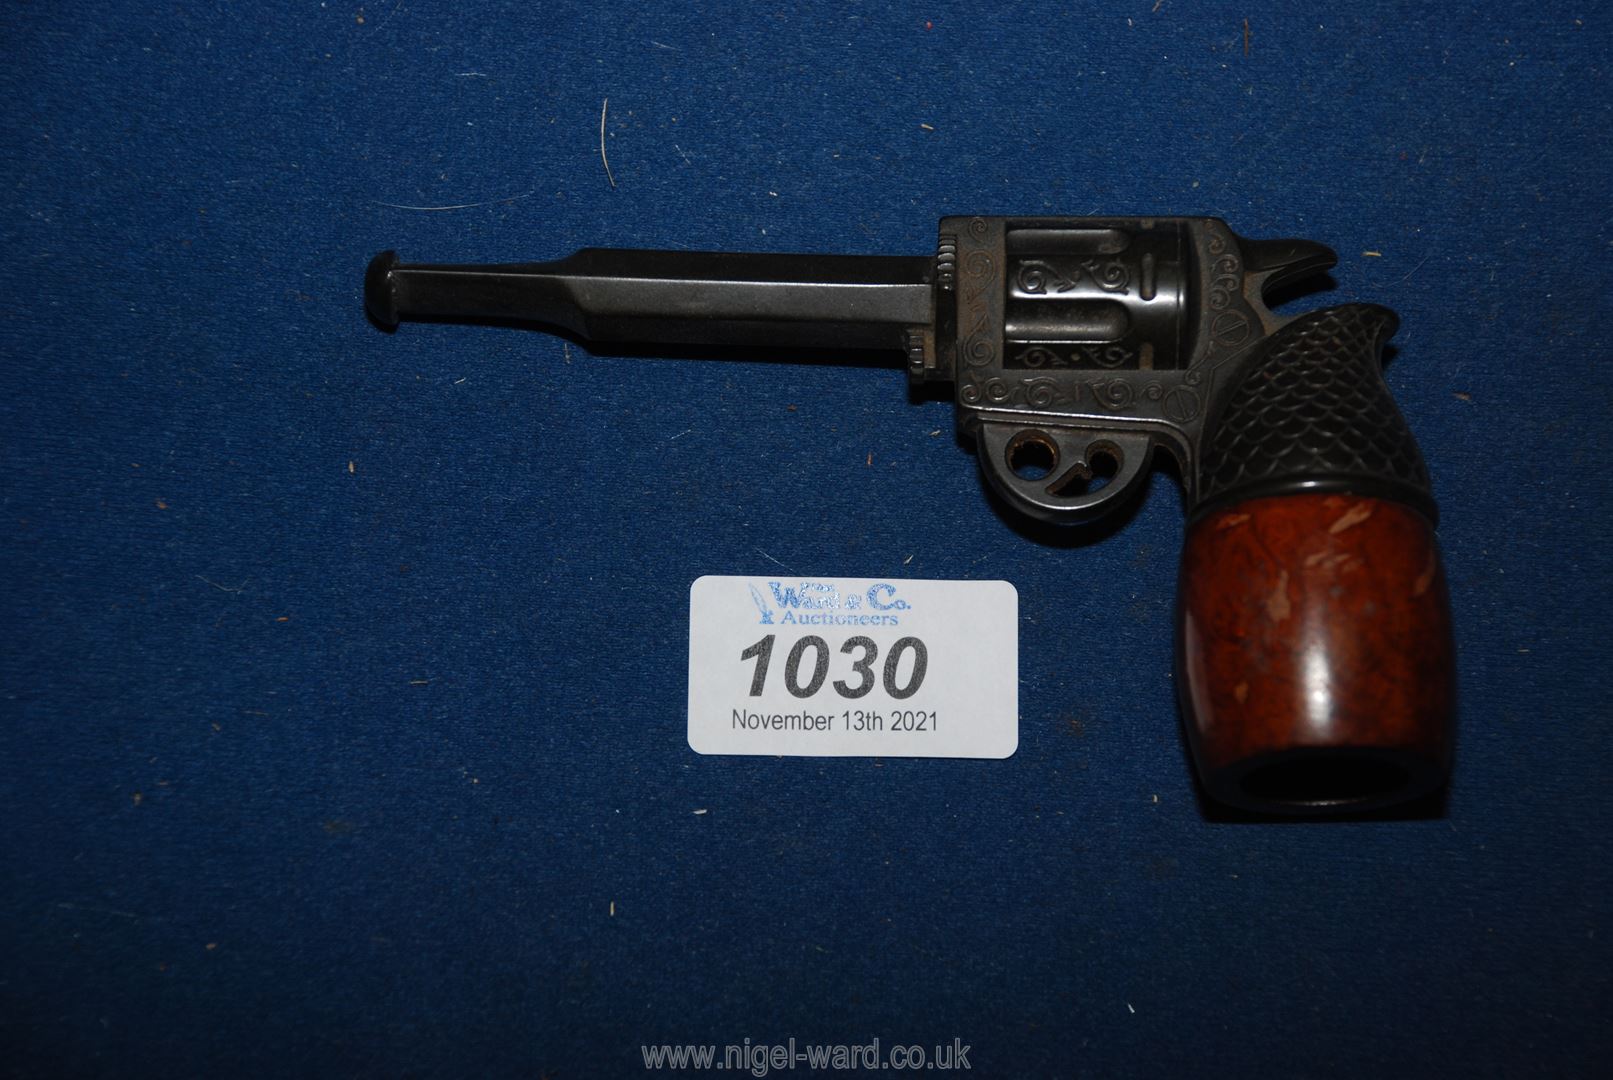 A novelty, vintage French pipe formed as a pistol made from Bakelite and briar.